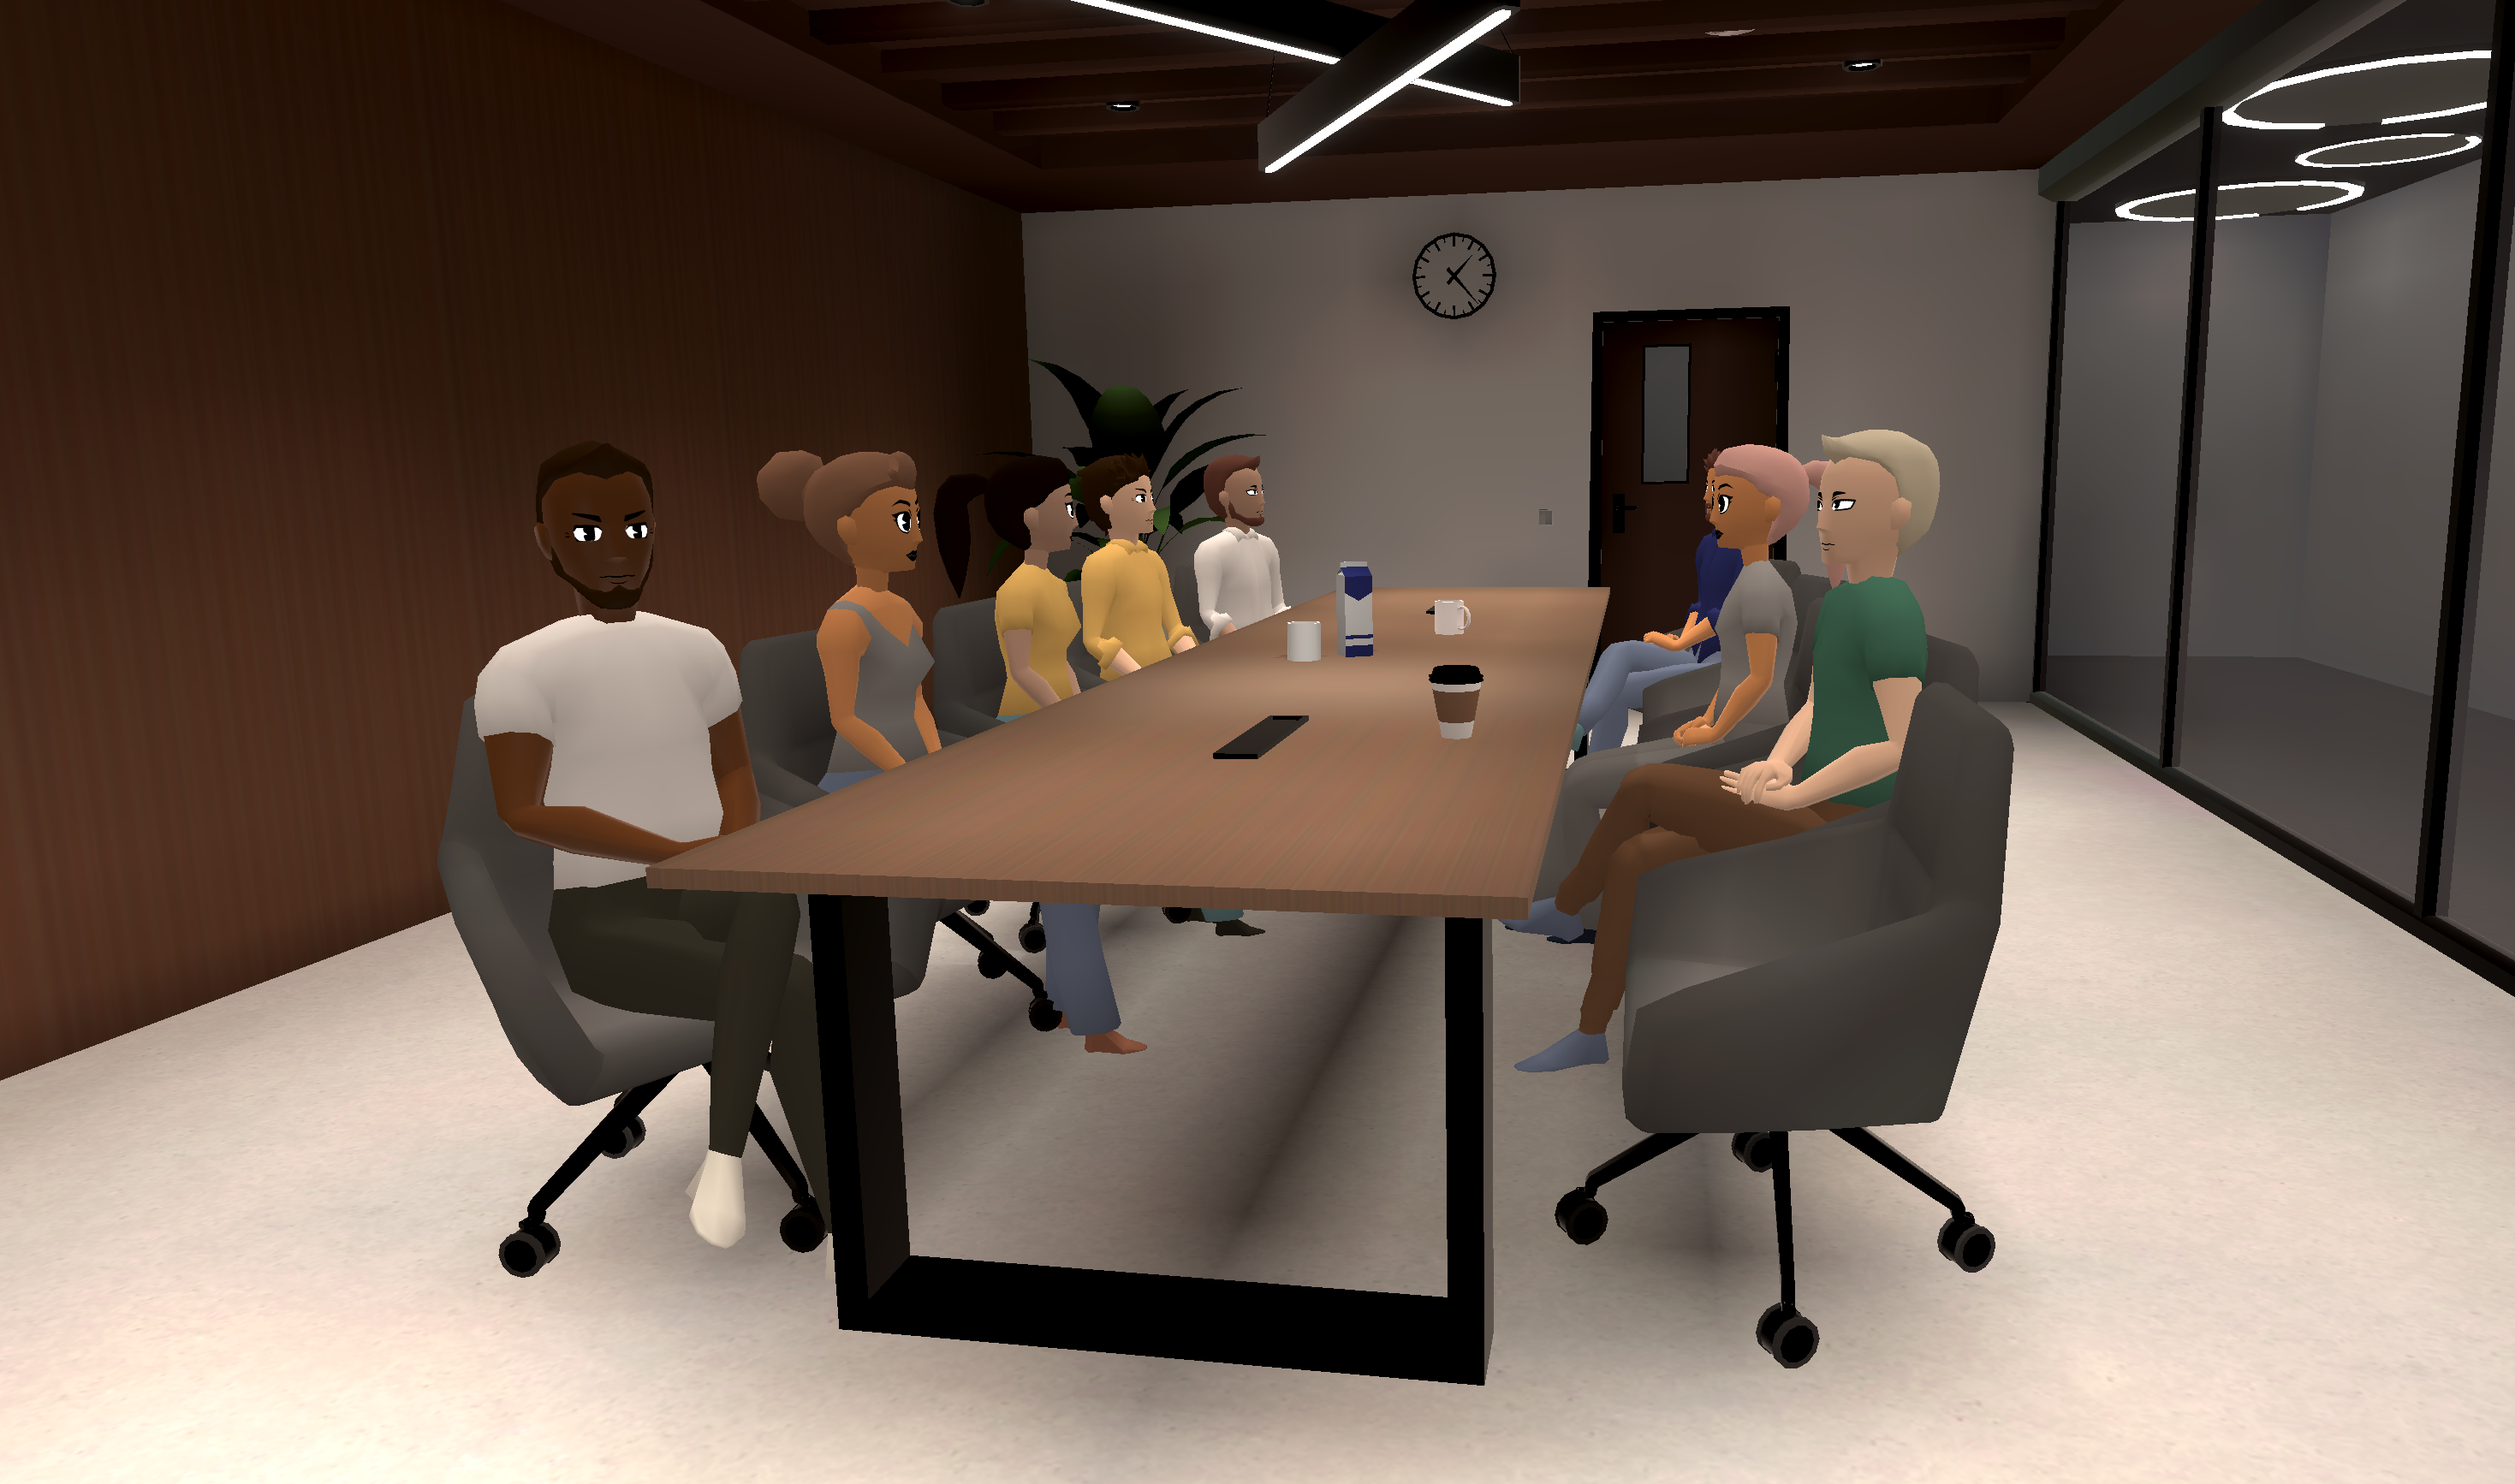 A 3D modeled meeting room with 10 3D avatars sitting by the table. One of them is looking straight at the speaker and the other ones seem to talk with each other.